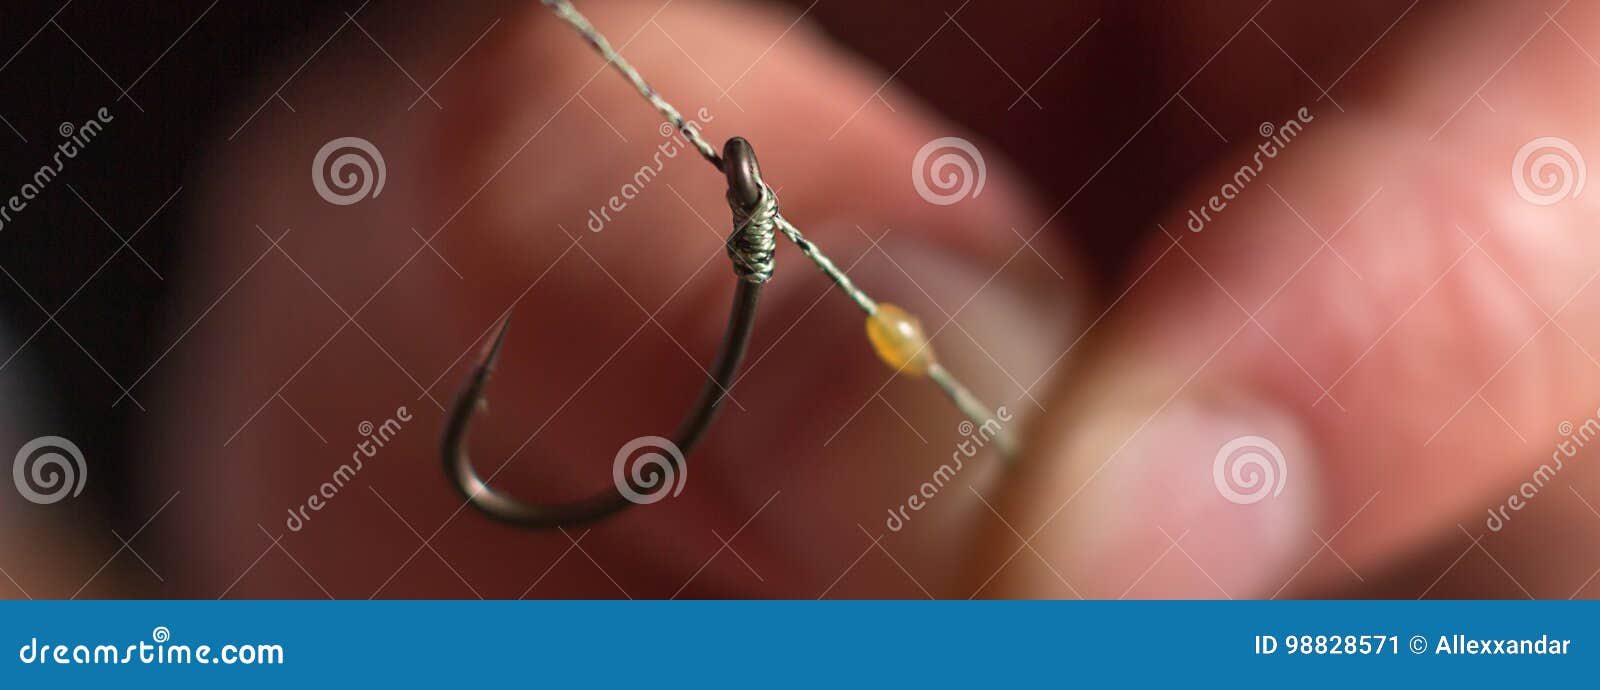 Man Hand Tying a Fishing Hook. Tie the Rig Stock Image - Image of bait,  detail: 98828571